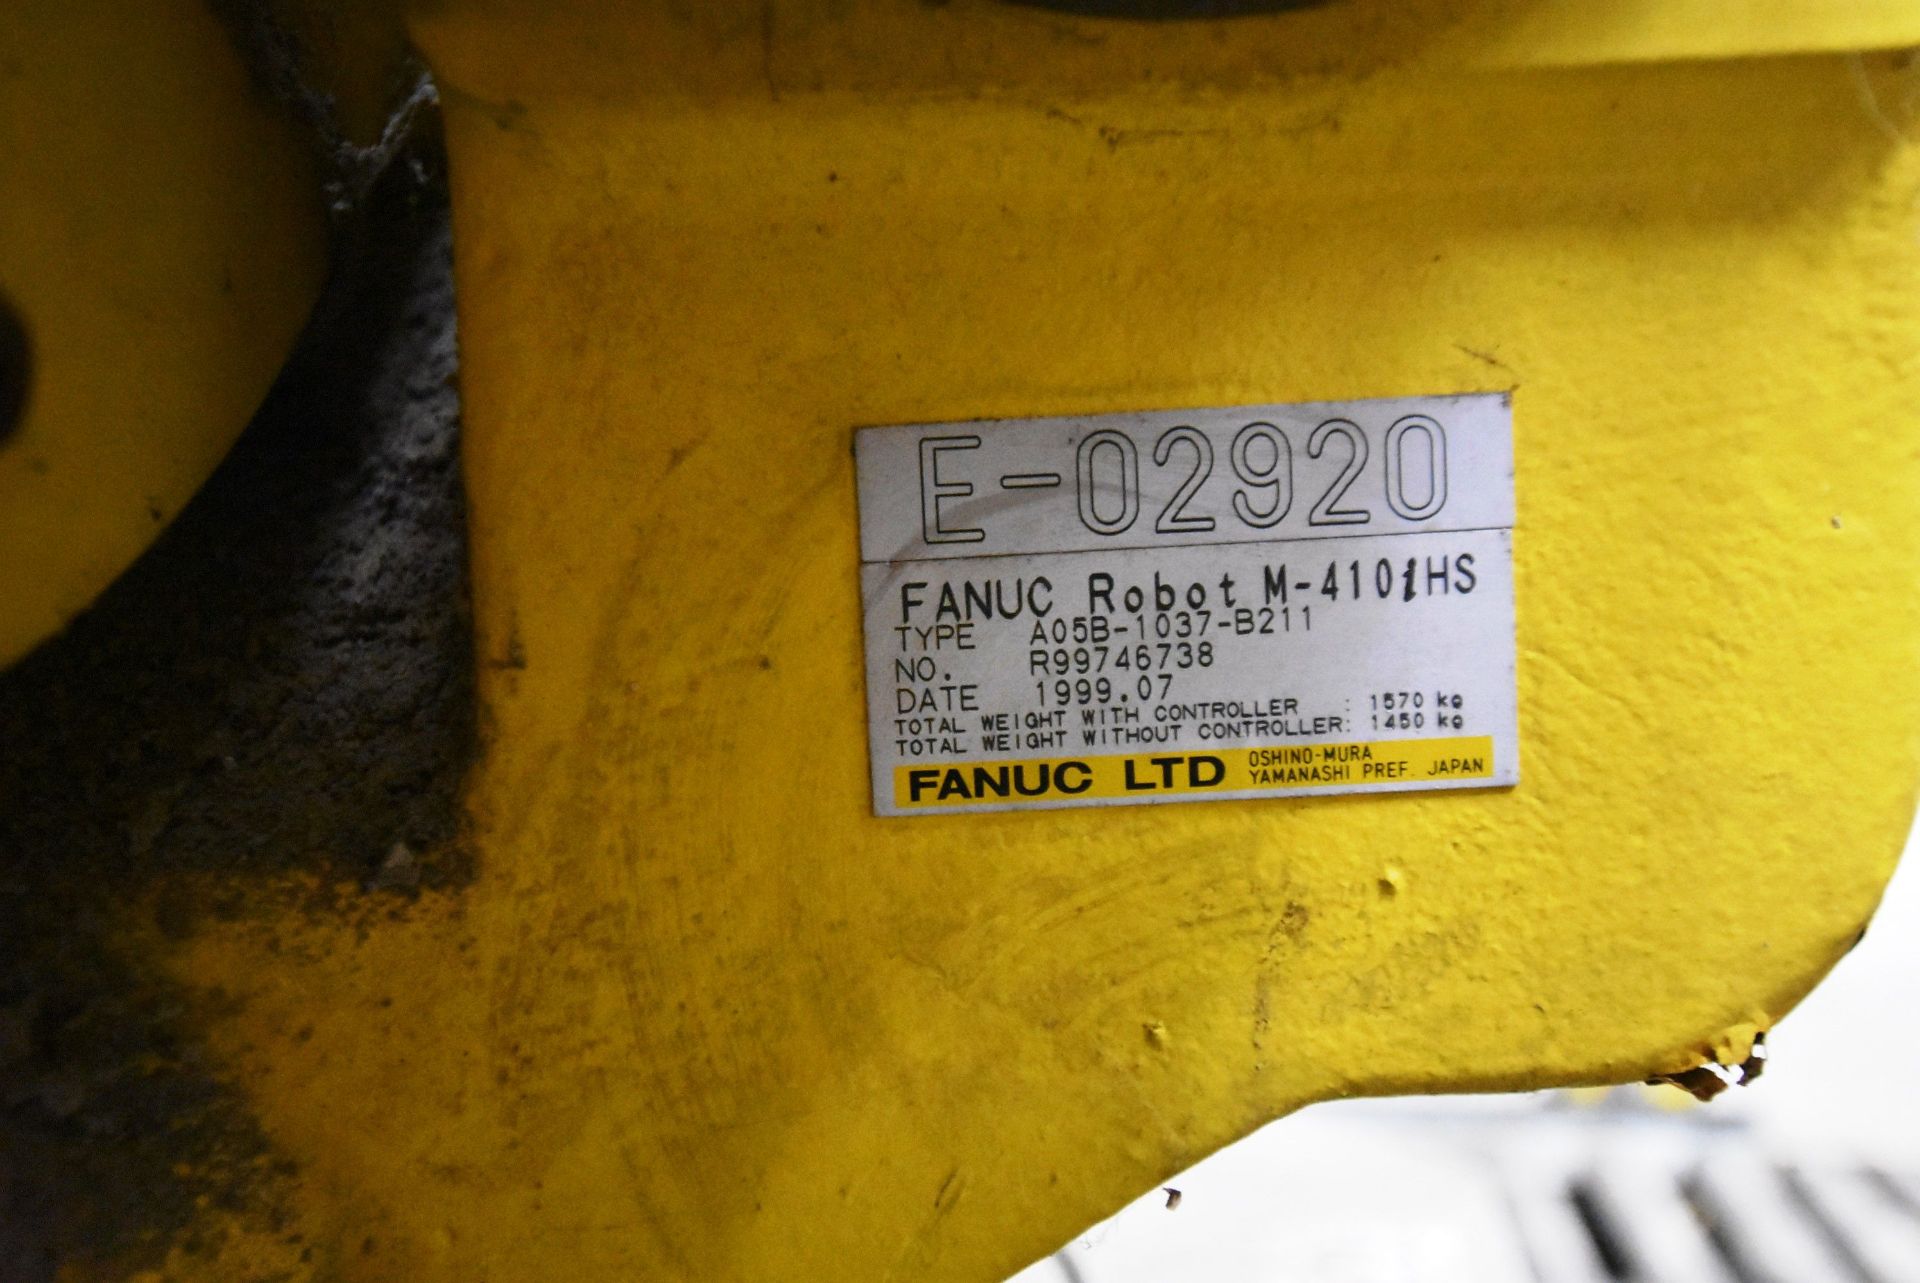 Fanuc M-410iHS ROBOTIC PALLETISER, serial no. R997 46738, type A05B-1037-B211, date 1999, with steel - Image 9 of 21